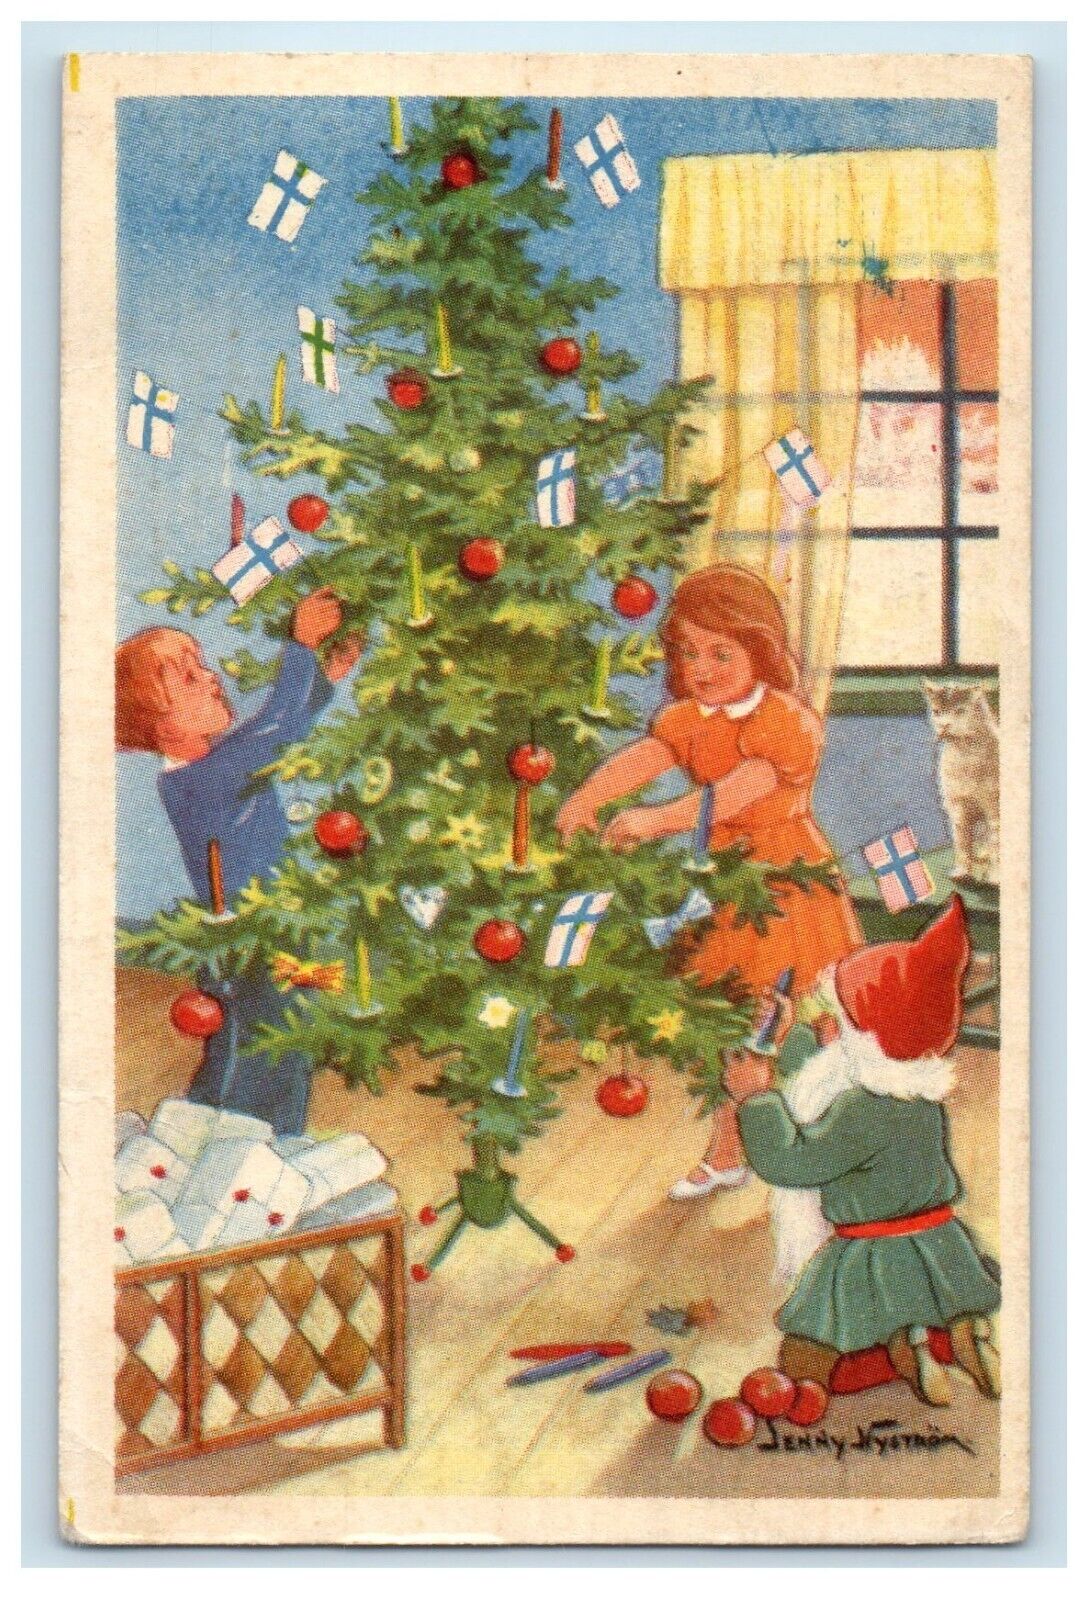 1948 Merry Christmas Childrens Decorating Christmas Tree Finland Posted Postcard